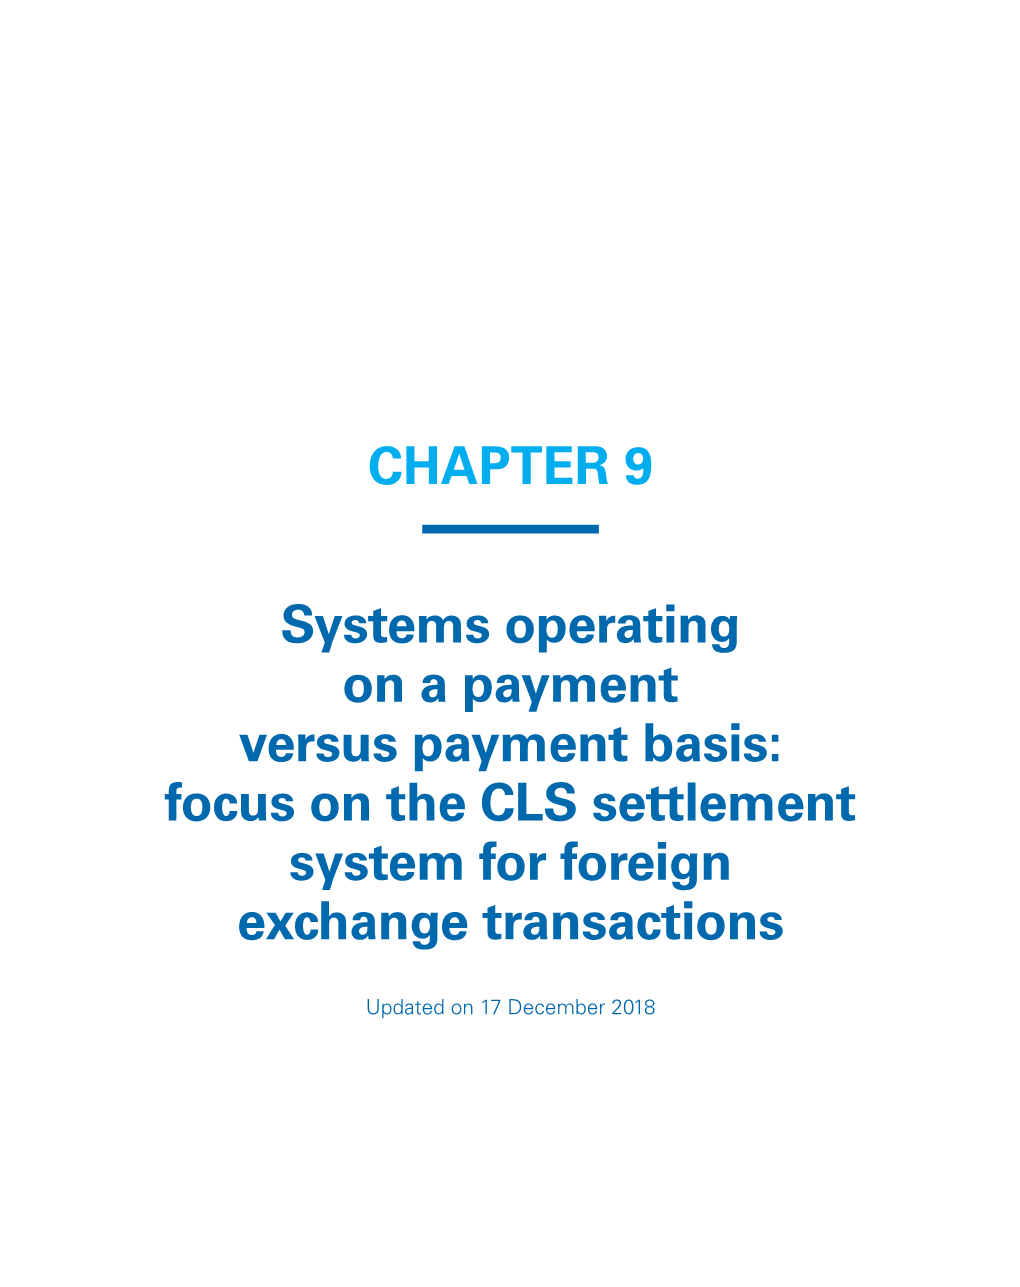 Focus on the CLS Settlement System for Foreign Exchange Transactions